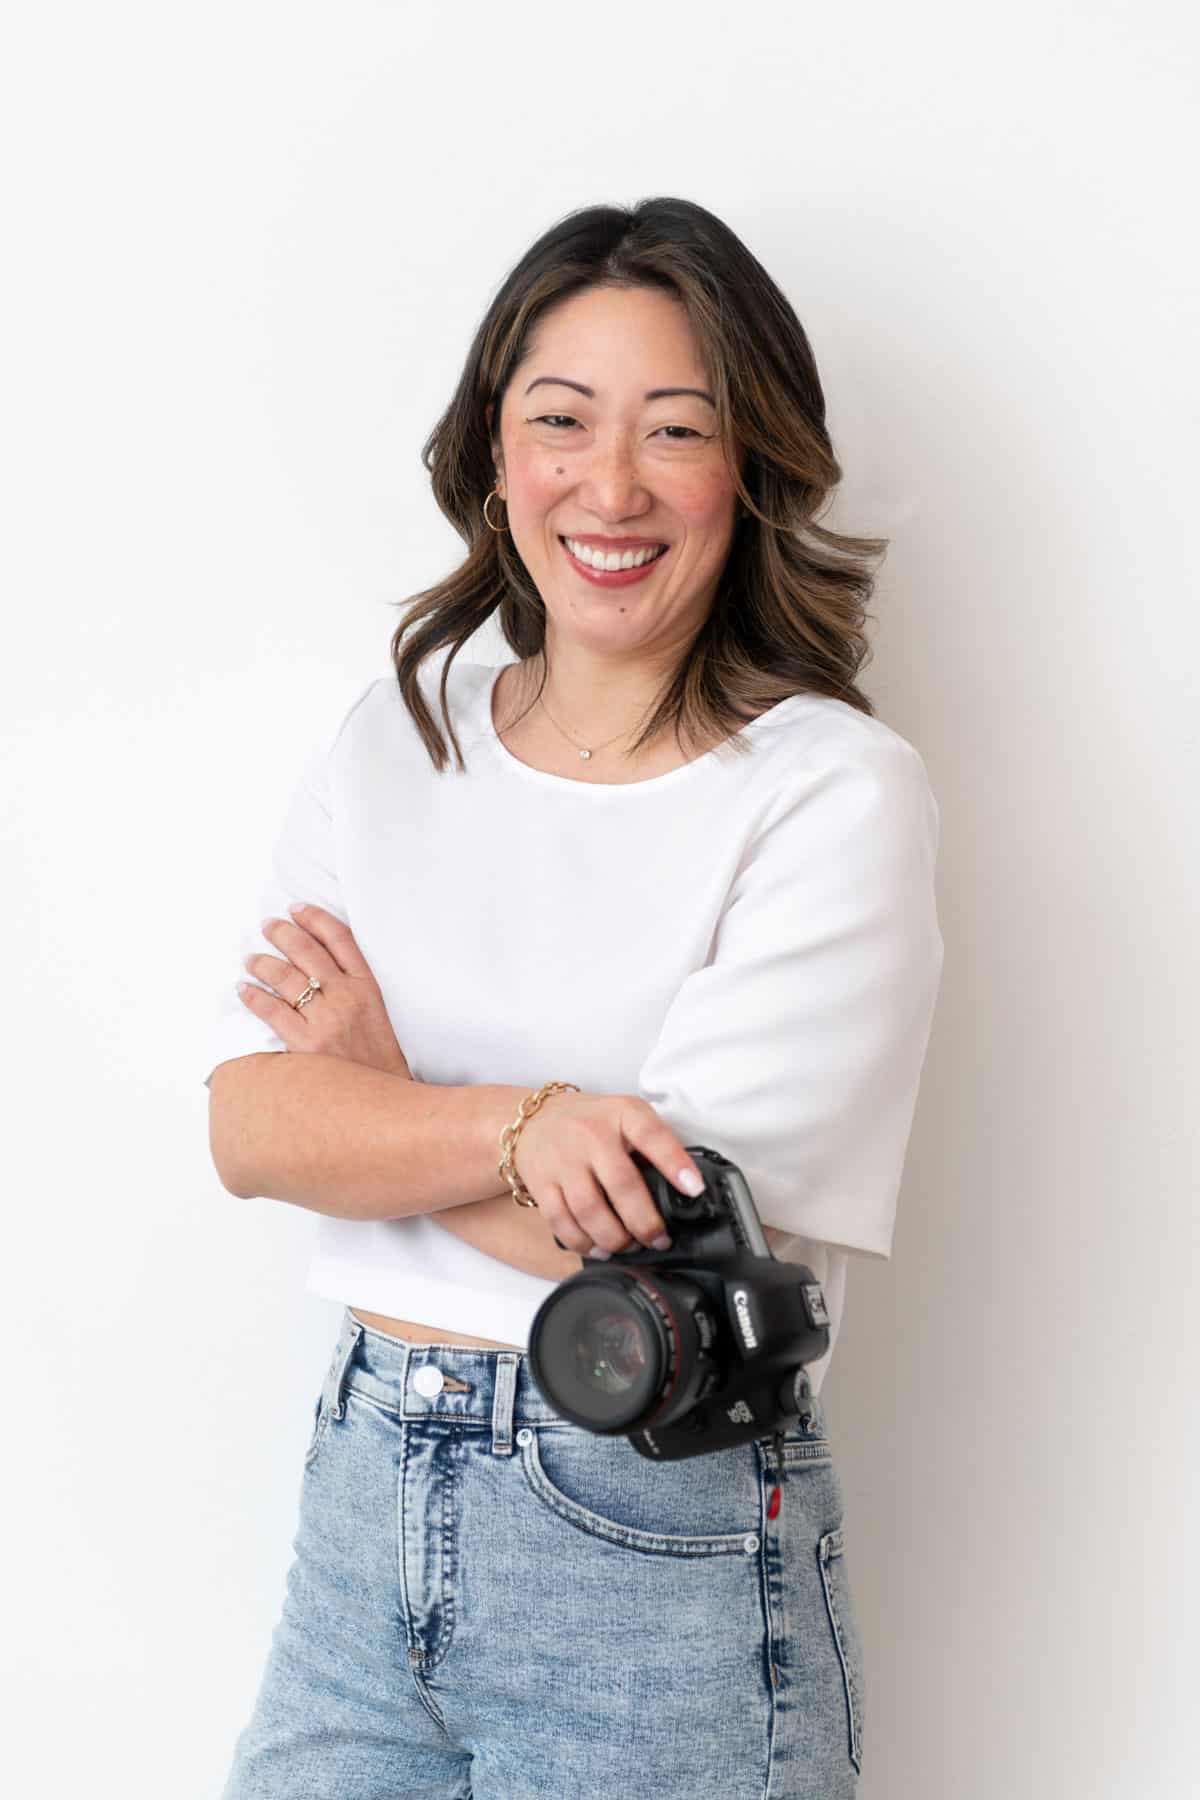 Julie Chiou in a white shirt and light blue jeans holding a camera with arms crossed and smiling against a wall